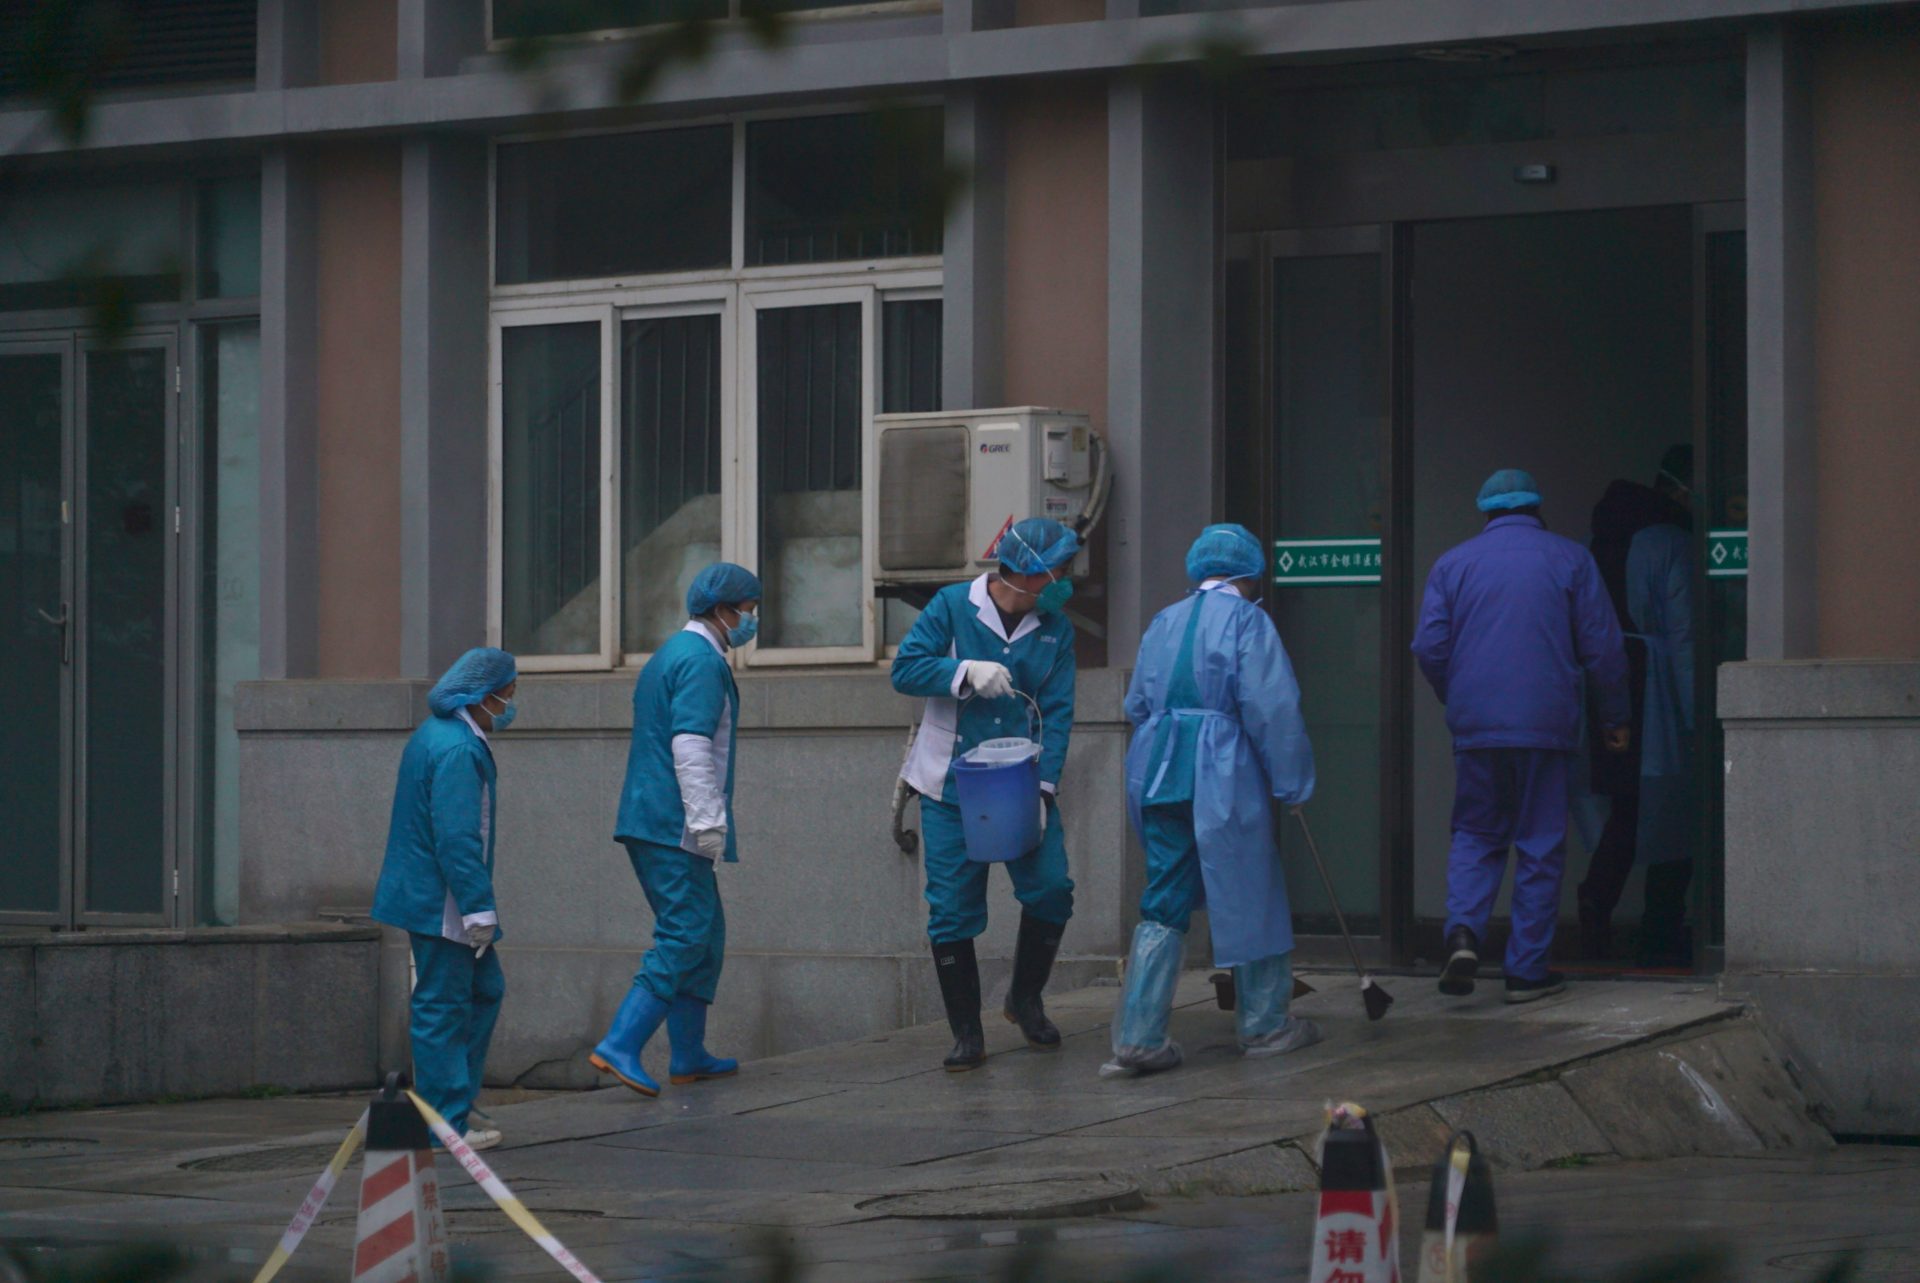 Hospital staff wash the emergency entrance of Wuhan Medical Treatment Center, where some infected with a new virus are being treated, in Wuhan, China, Wednesday, Jan. 22, 2020. The number of cases of a new coronavirus from Wuhan has risen to over 400 in China health authorities said Wednesday.